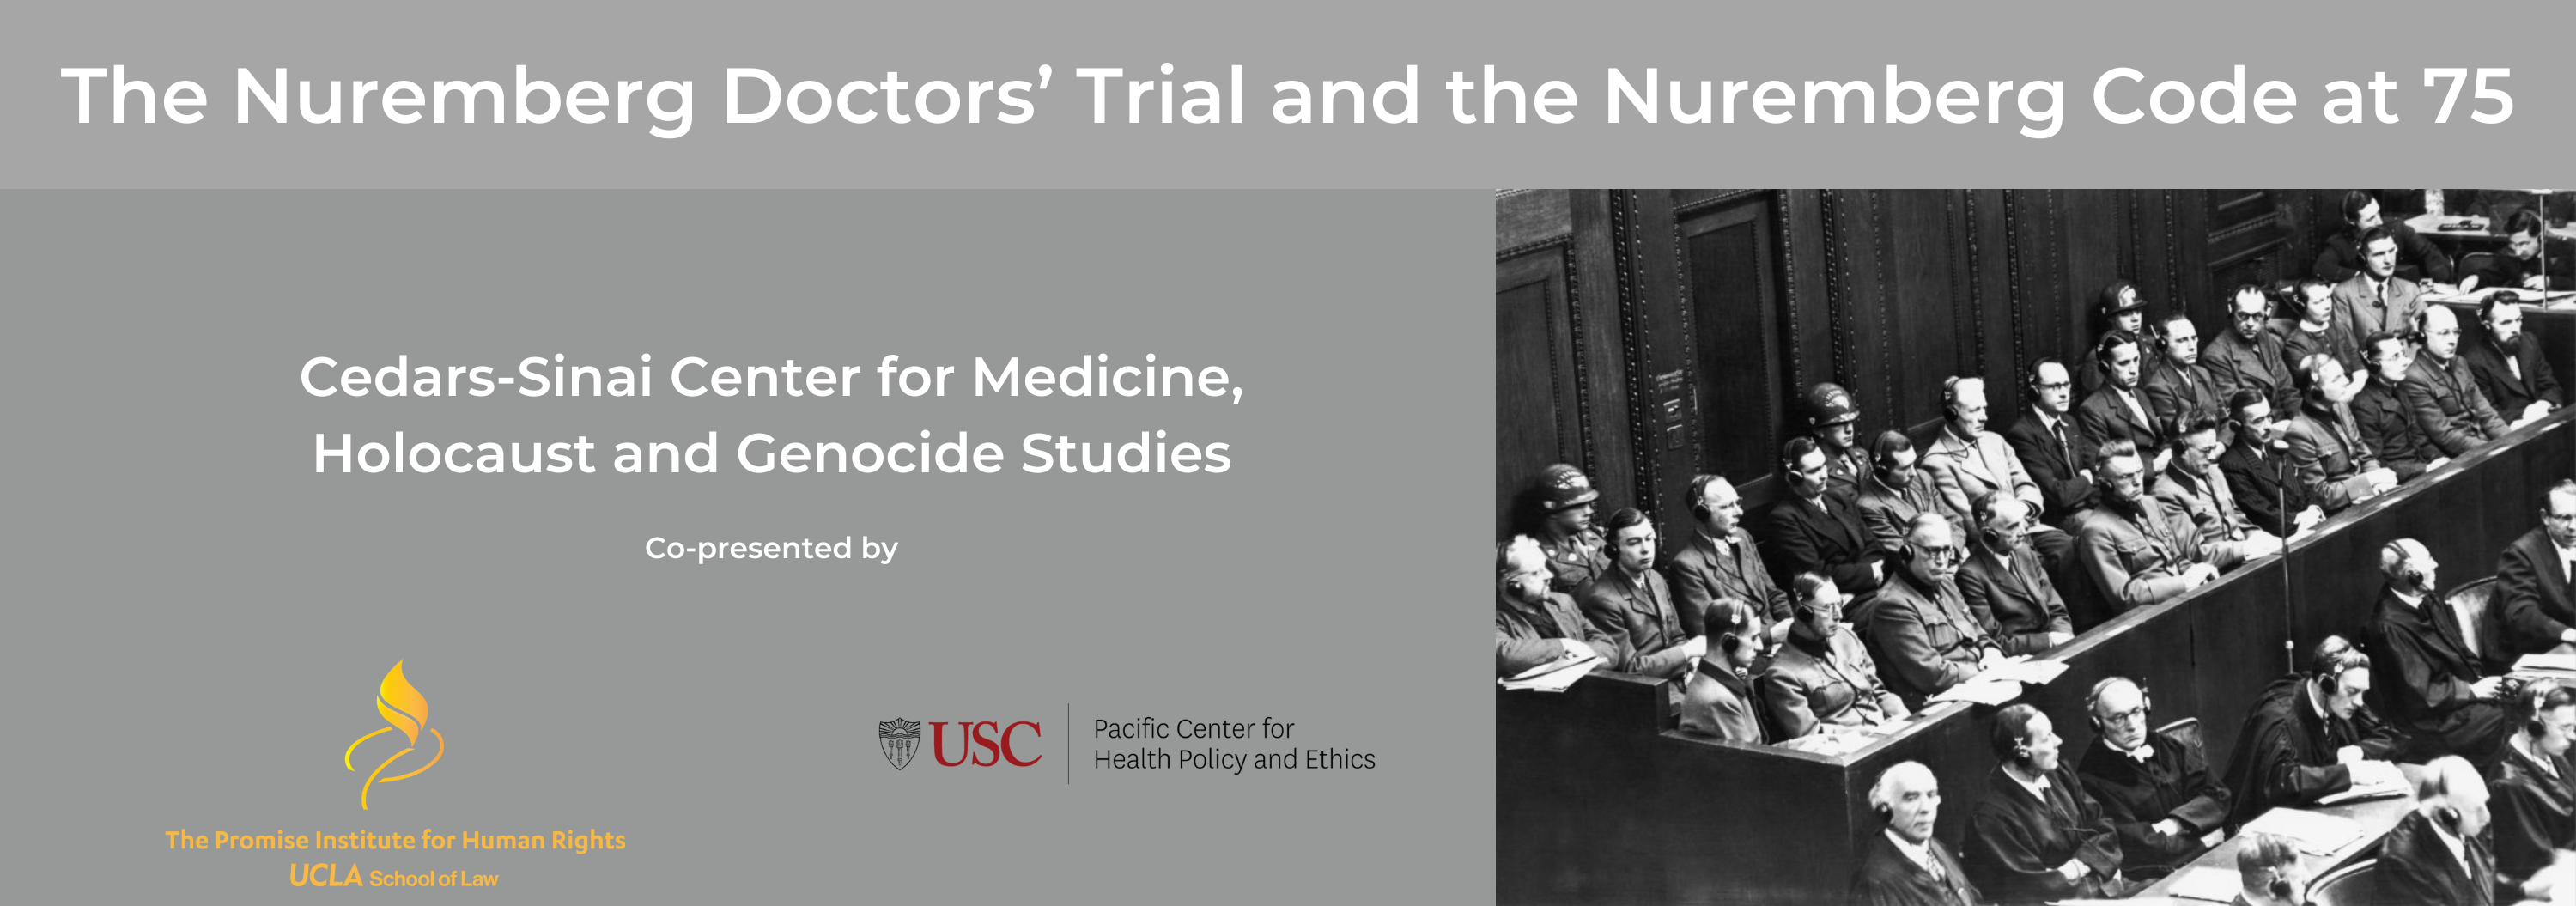 The Nuremberg Doctors’ Trial and the Nuremberg Code at 75: History, Legacy and Medical Crimes Prosecution and Litigation Today Banner